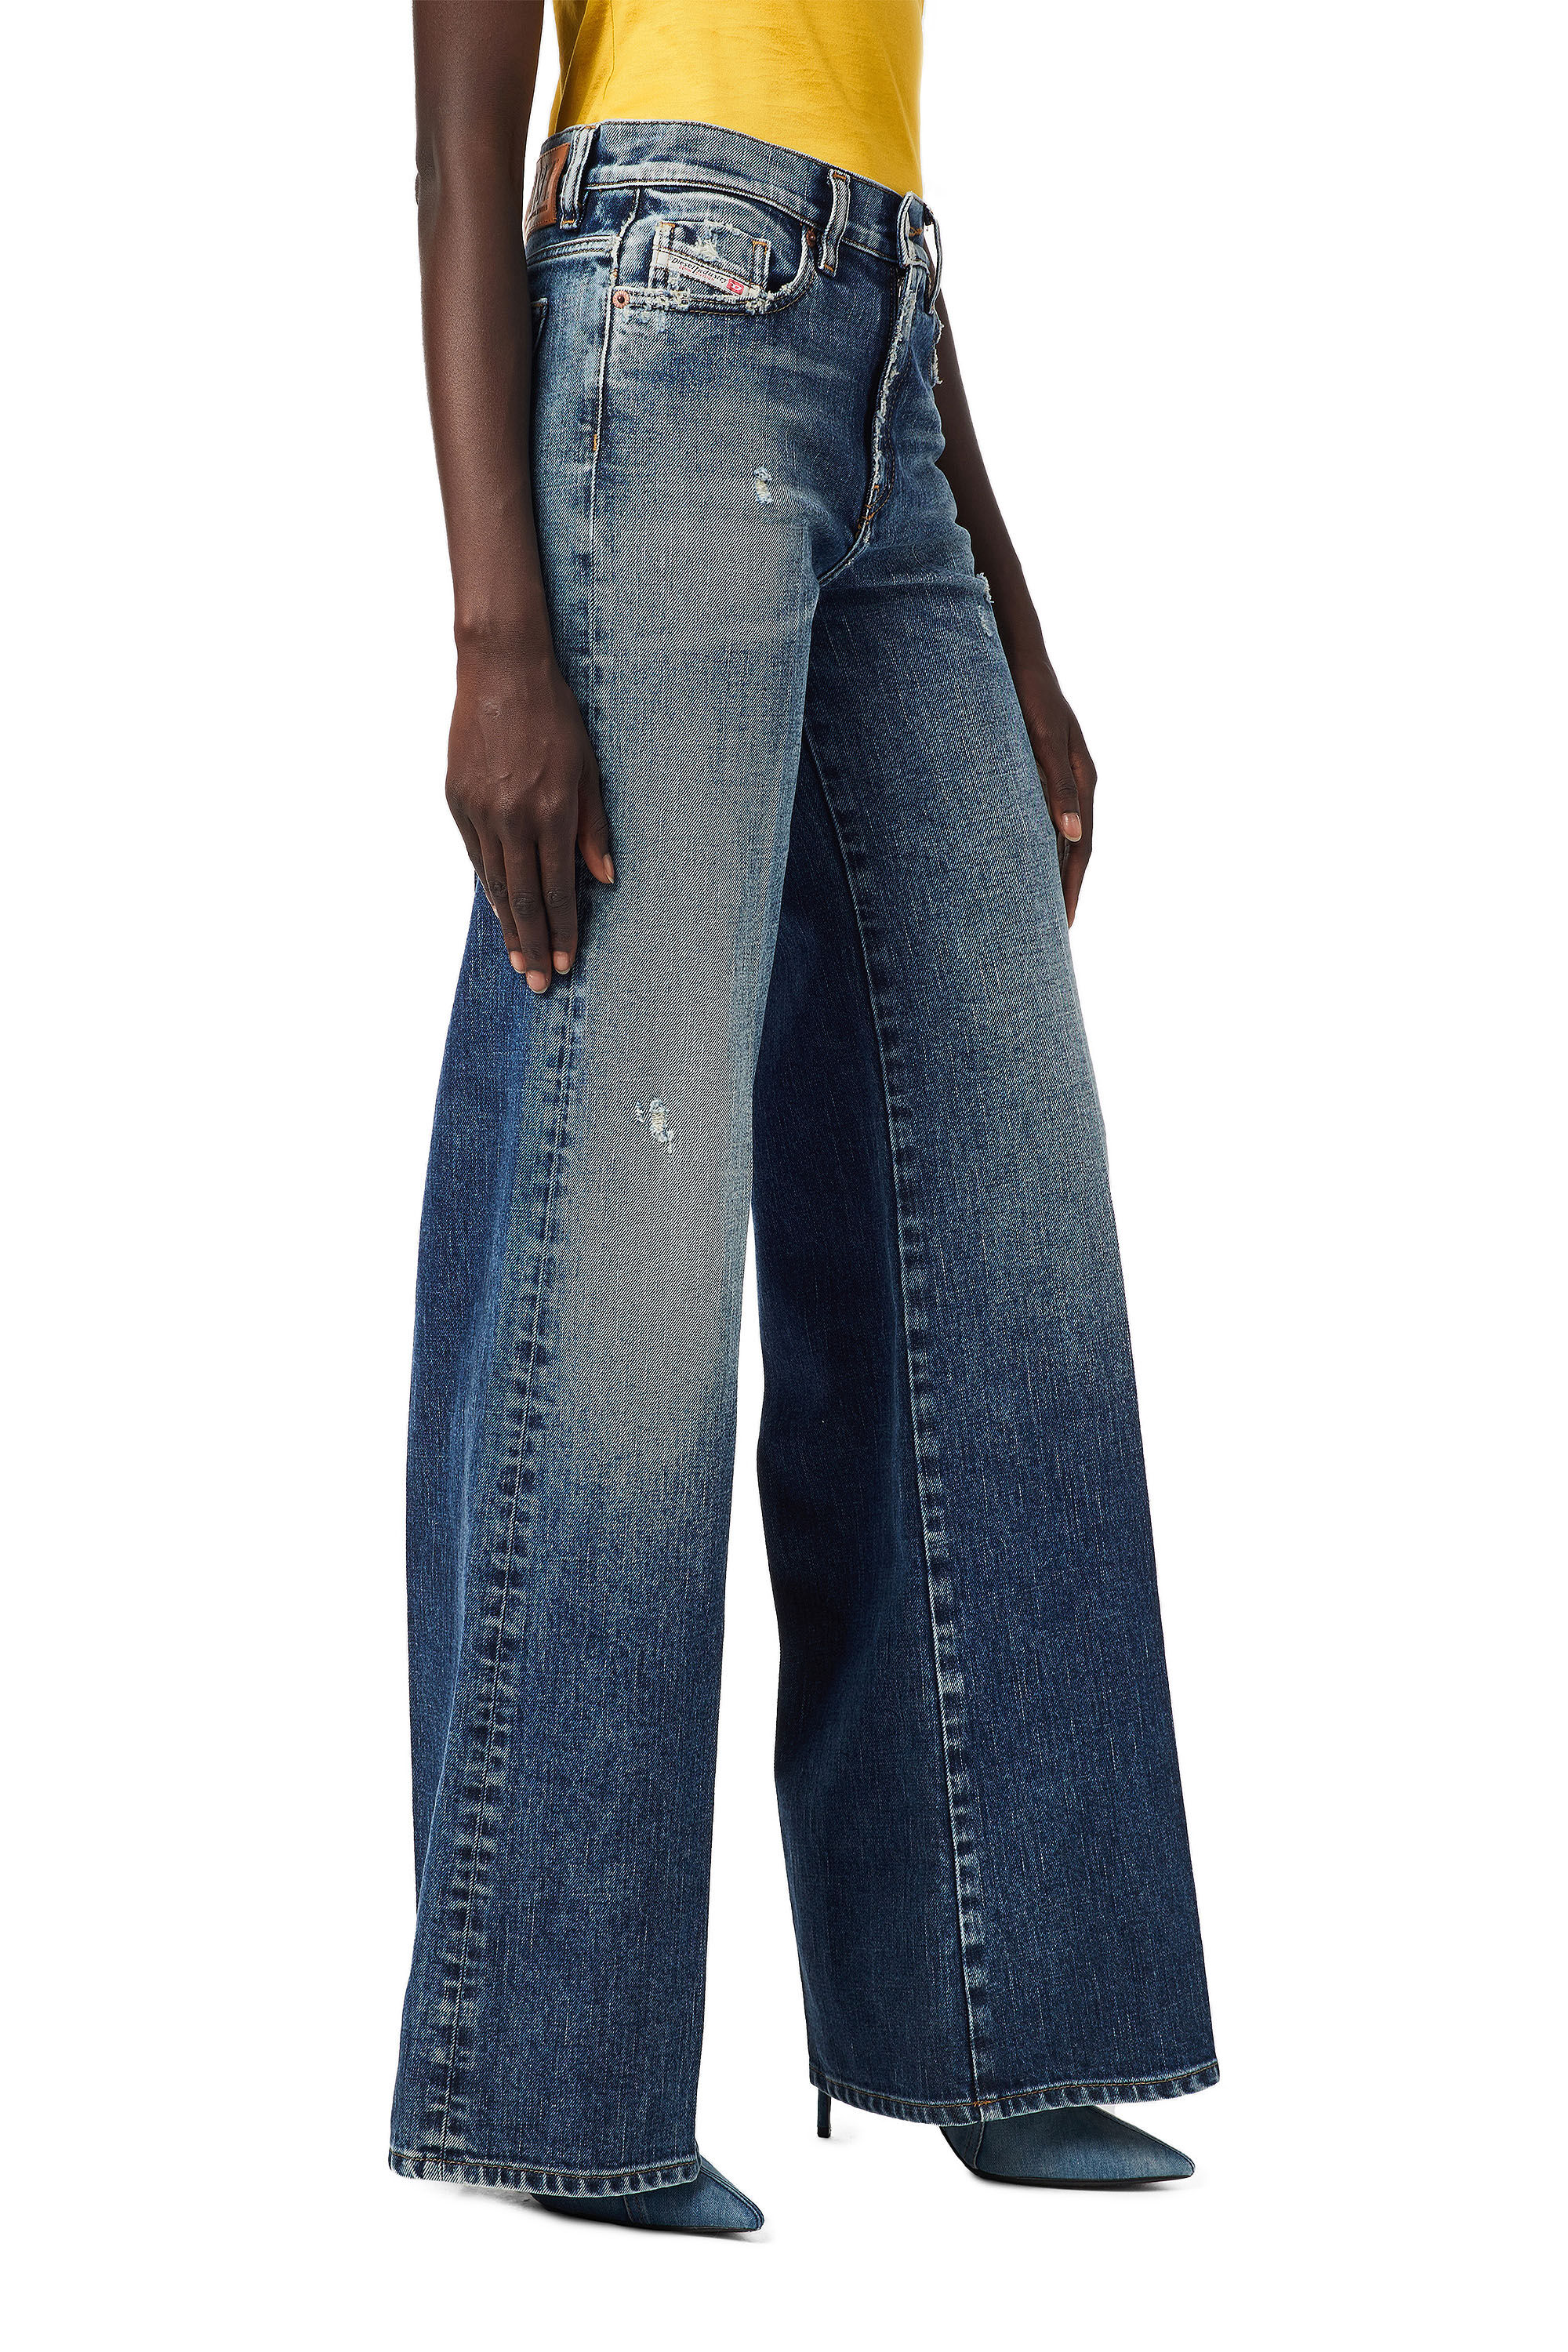 Diesel - D-Akemi 09B17 Bootcut and Flare Jeans,  - Image 7